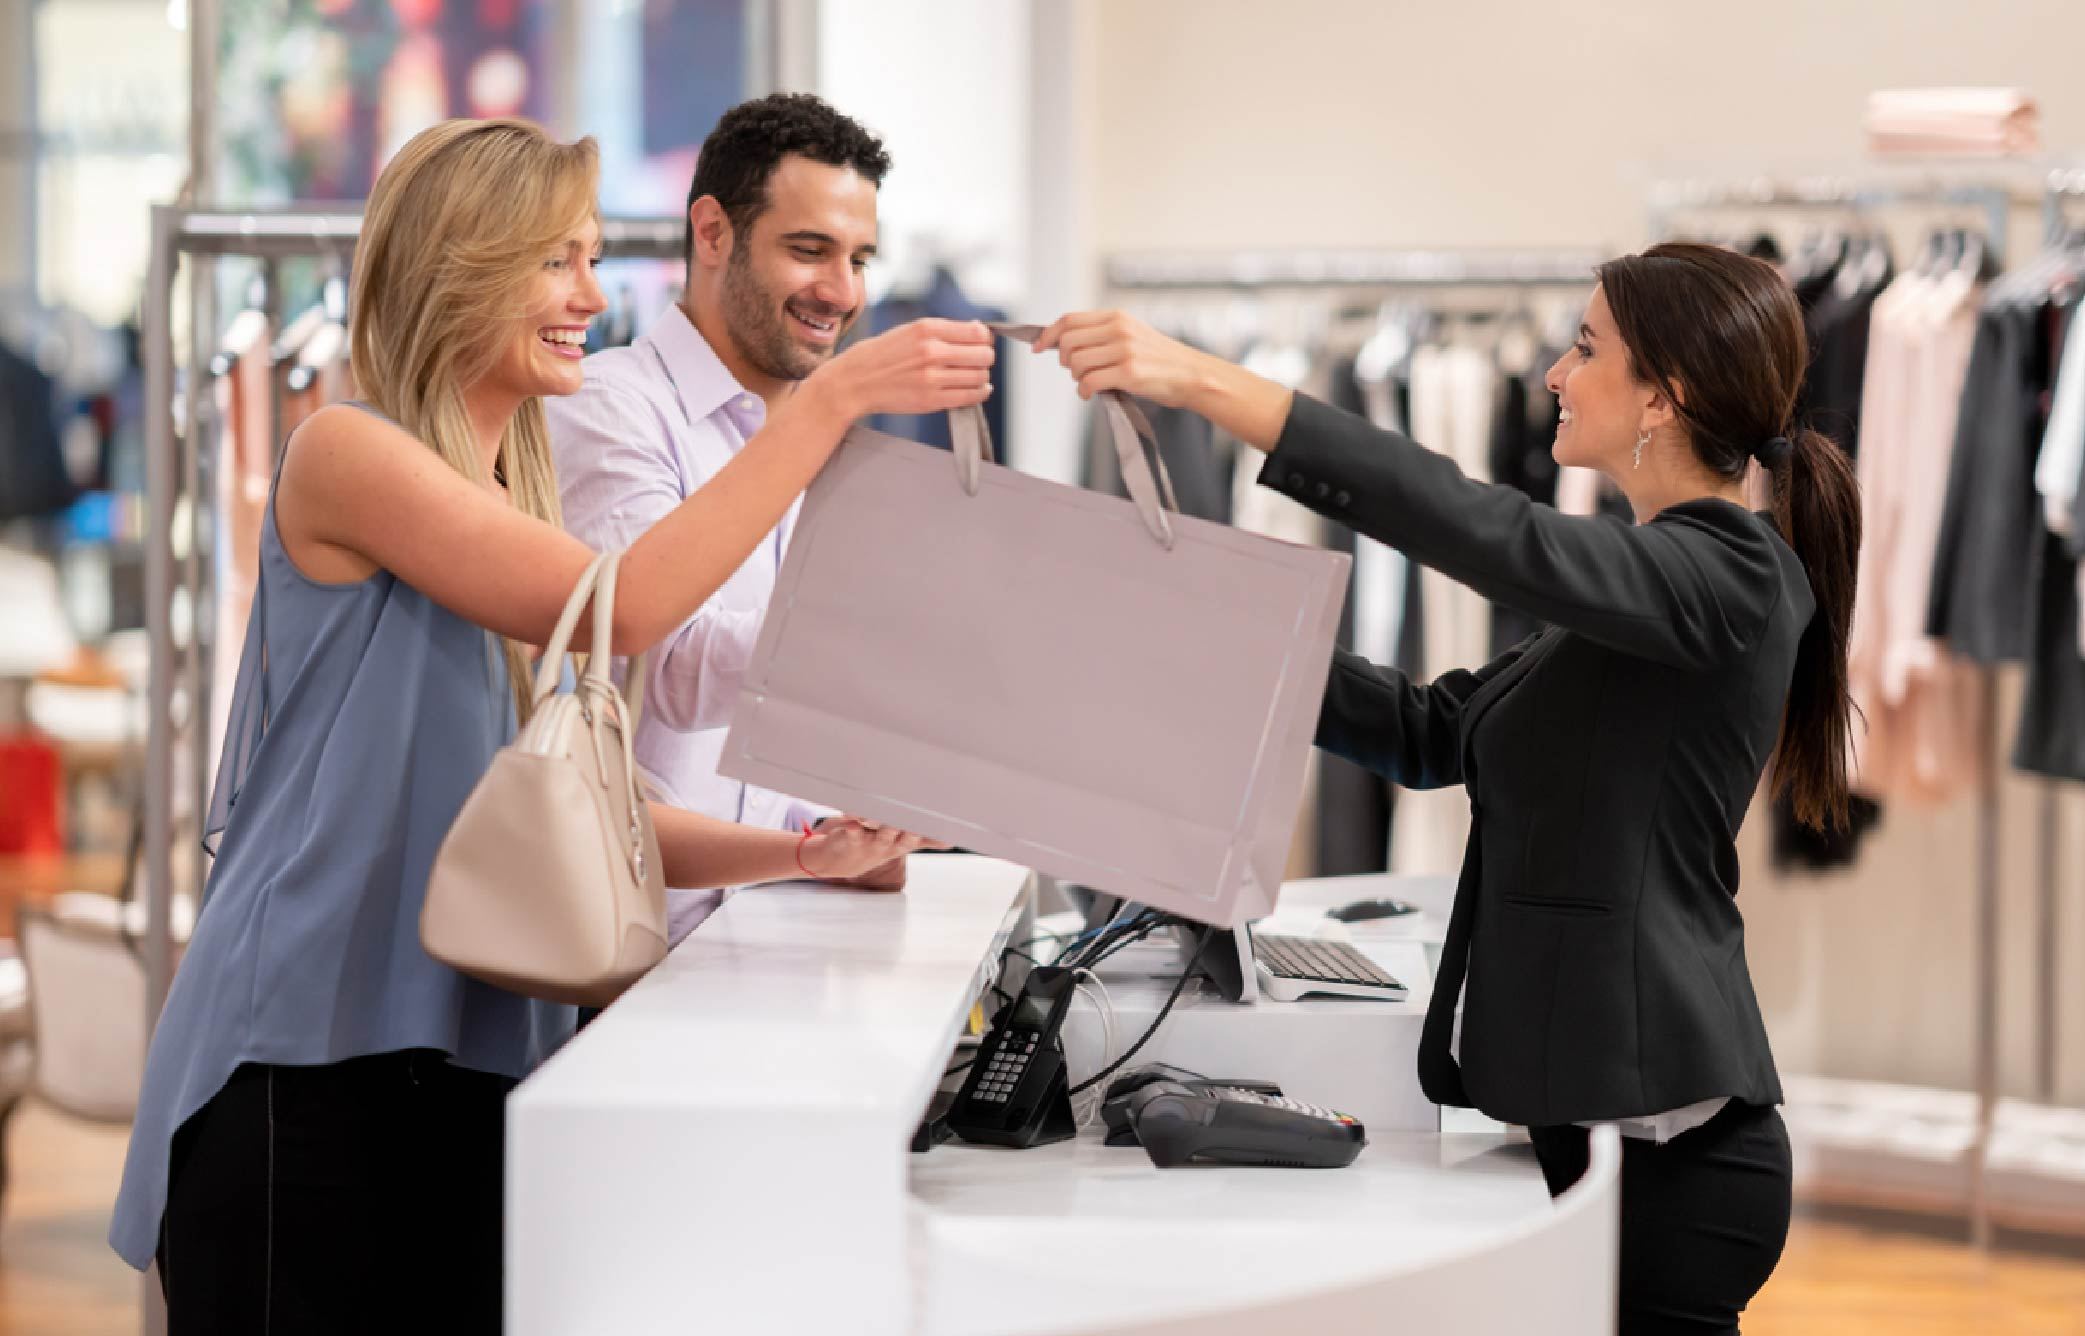 The Power of Clienteling: 4 Reasons Why Retailers Should Adopt the Technique | PointofSale Retail clerk handing shopper bag Retail customer service tips 01 1